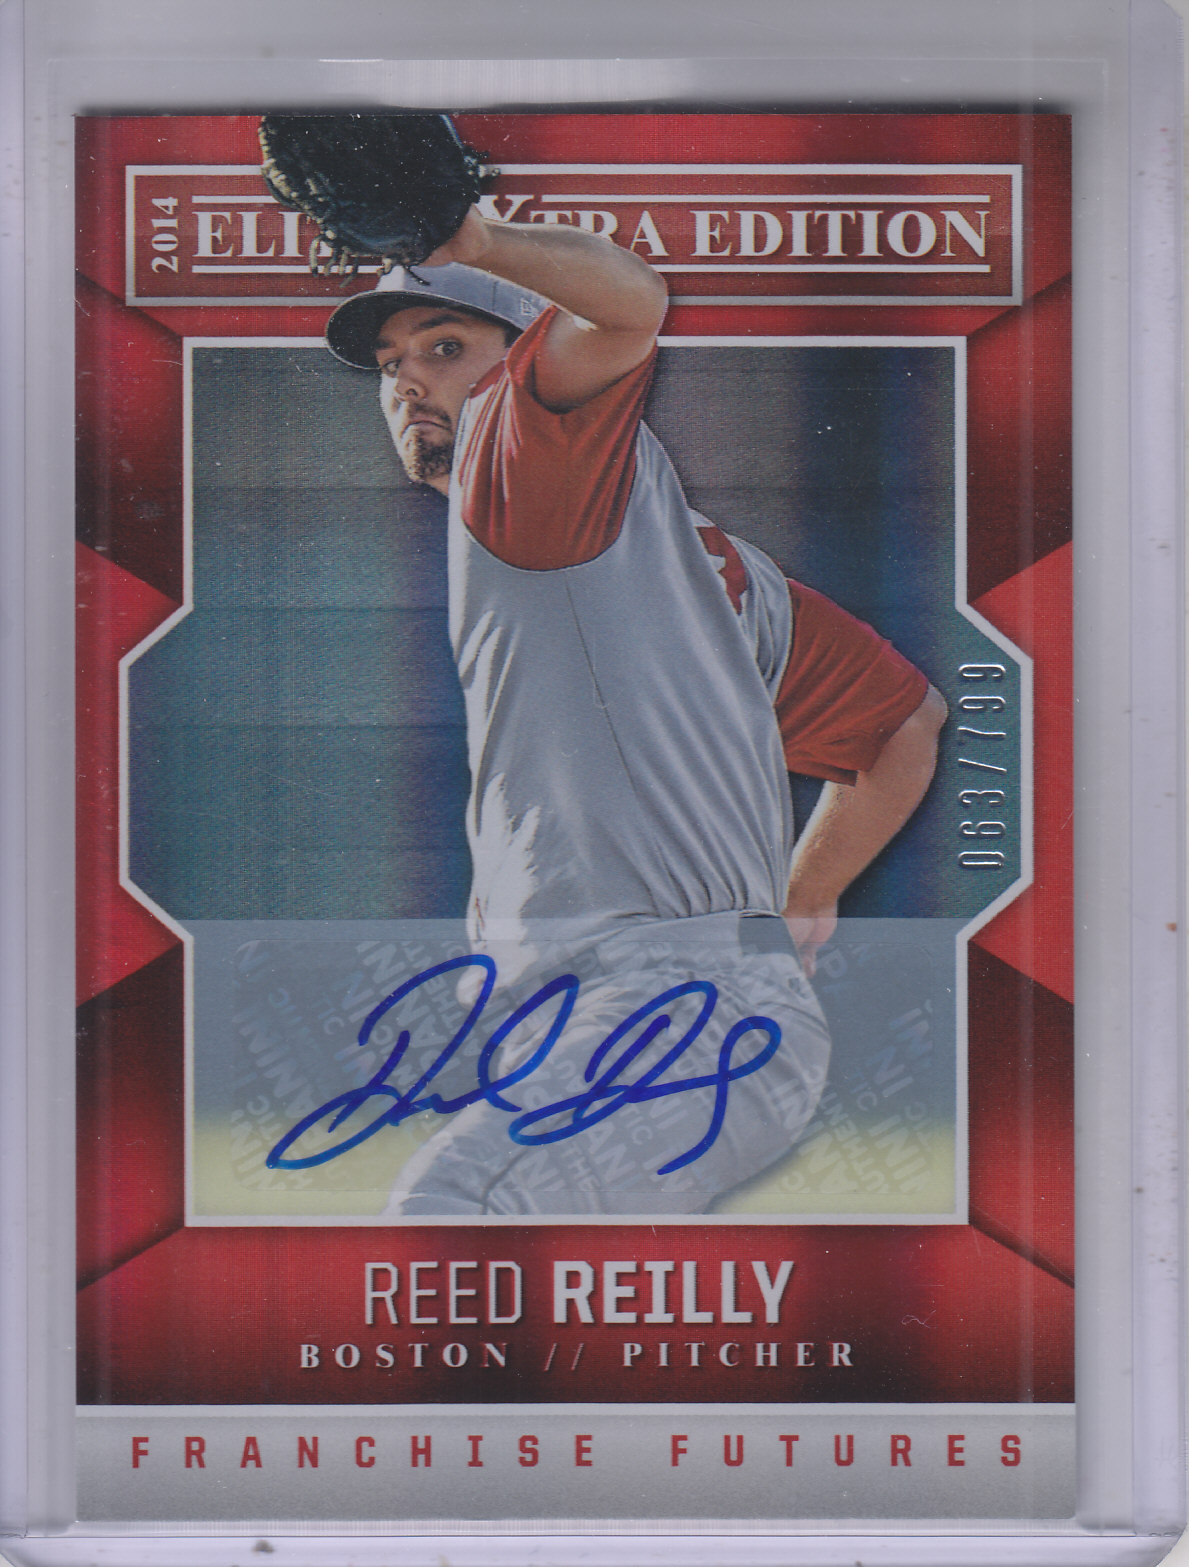  Reed Reilly player image